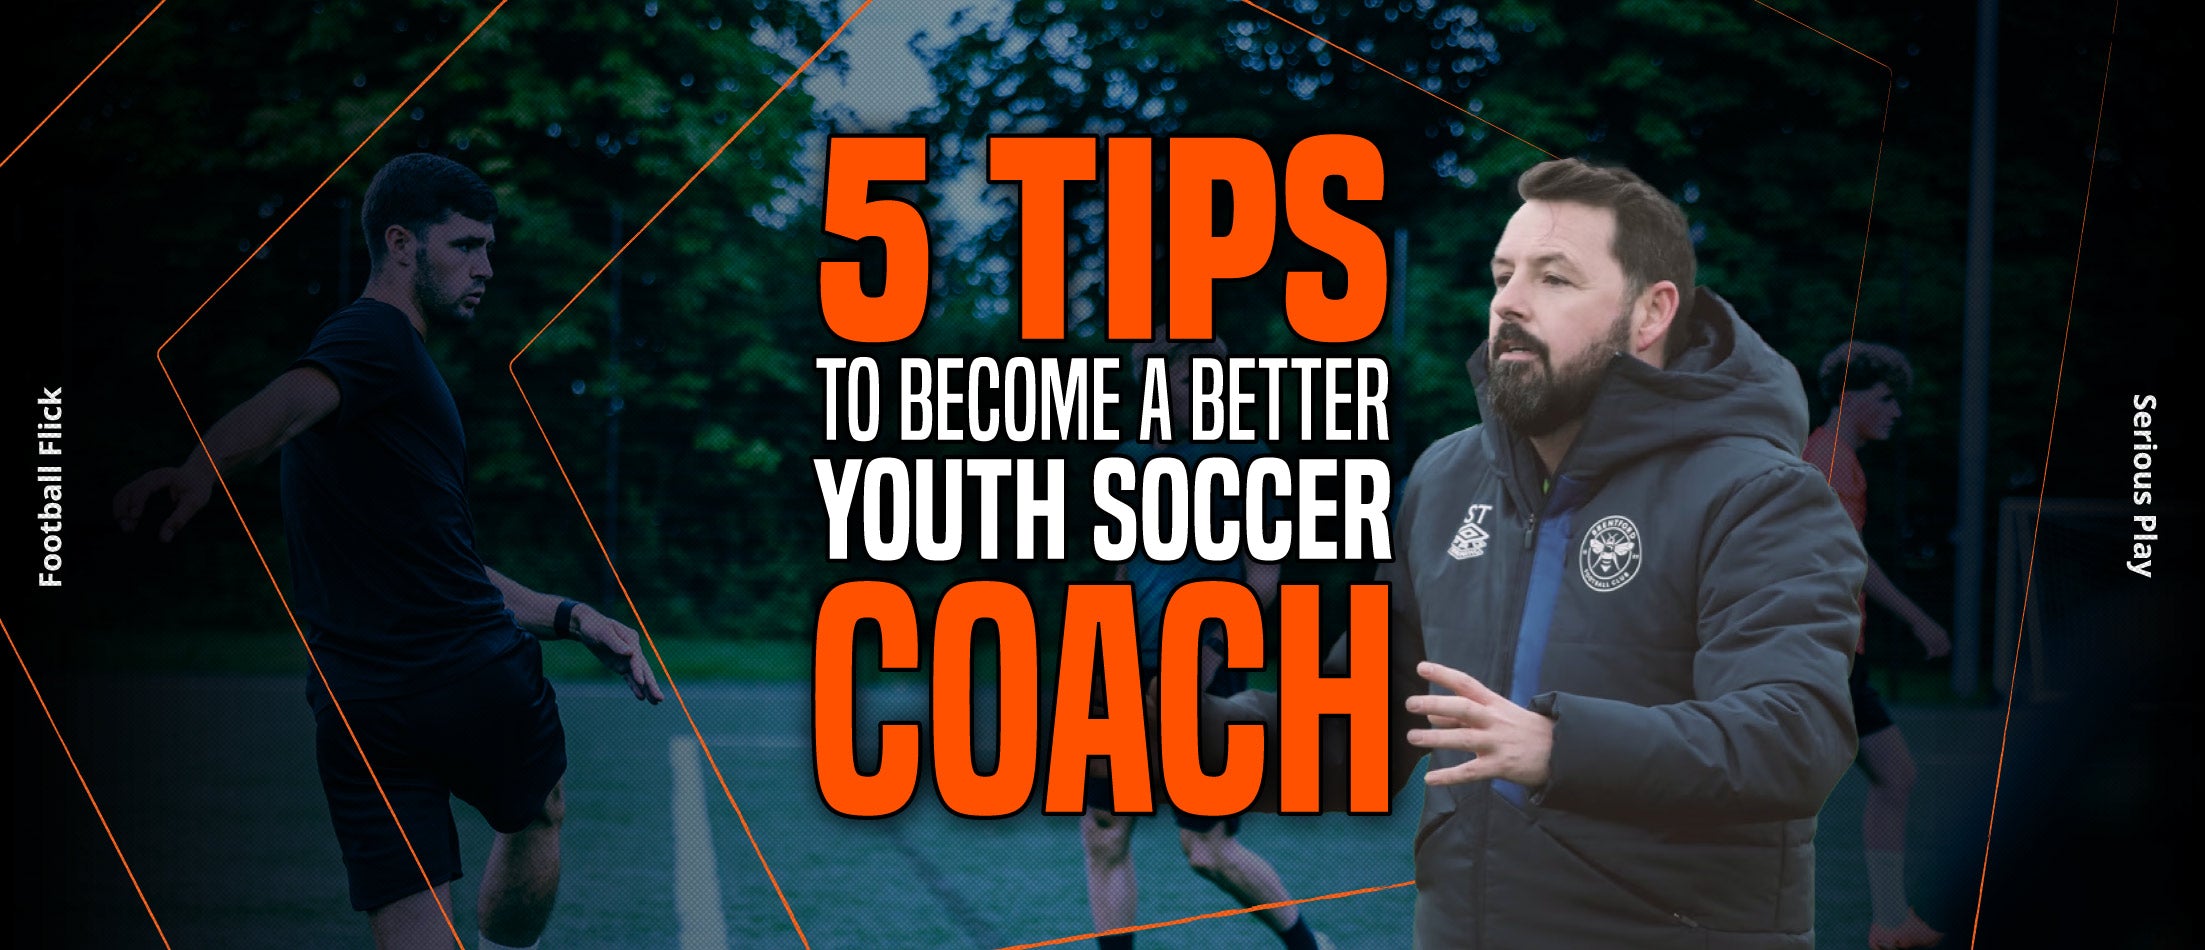 5 Top Tips to Make you a Better Youth Soccer Coach